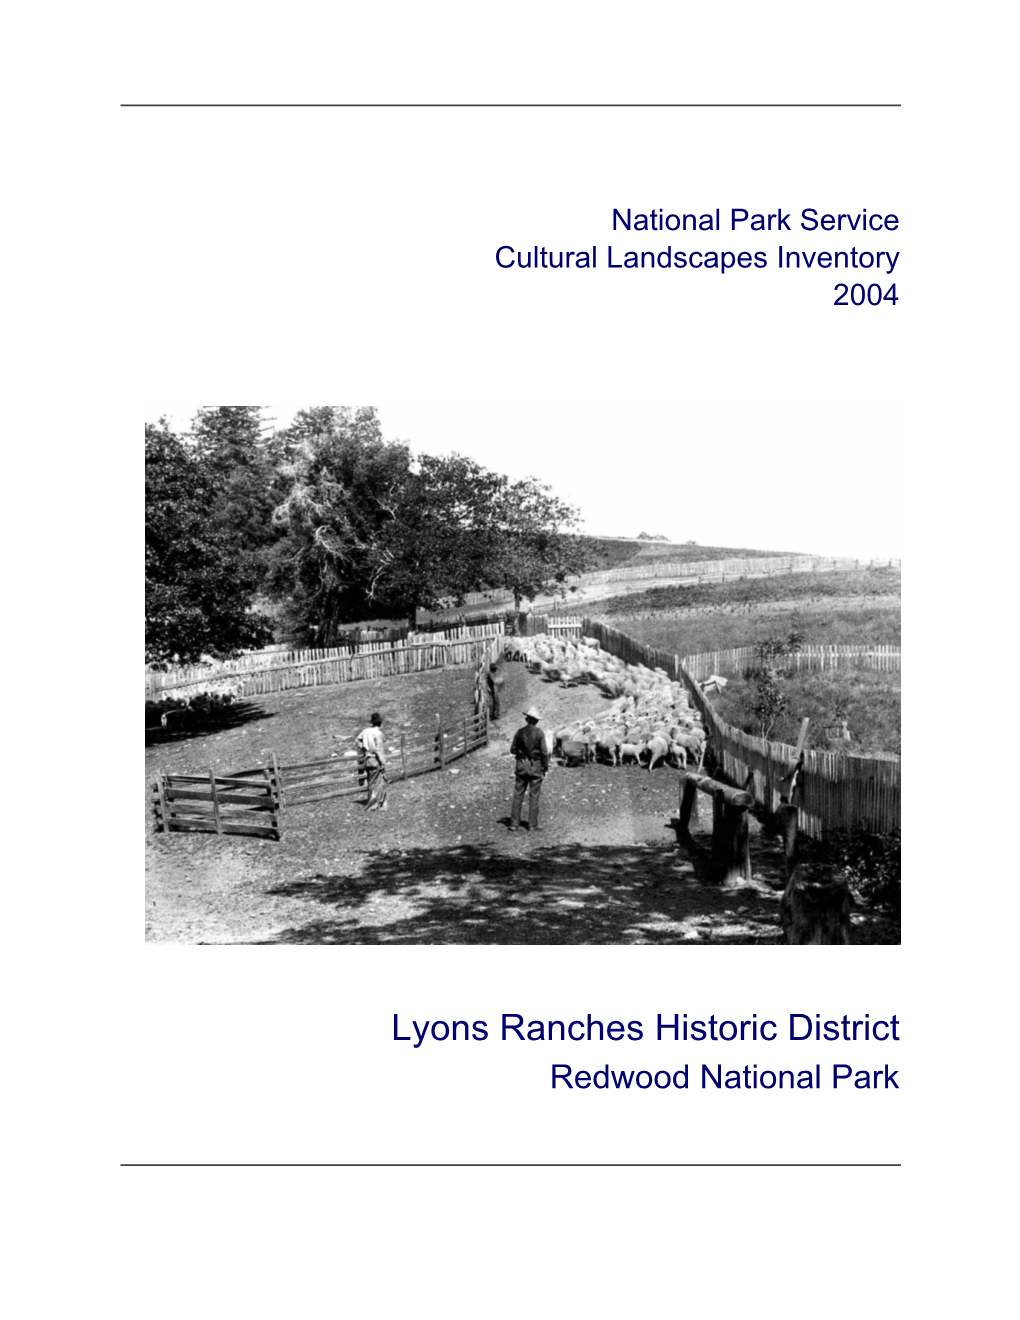 Cultural Landscapes Inventory, Lyons Ranches Historic District, Redwood National Park